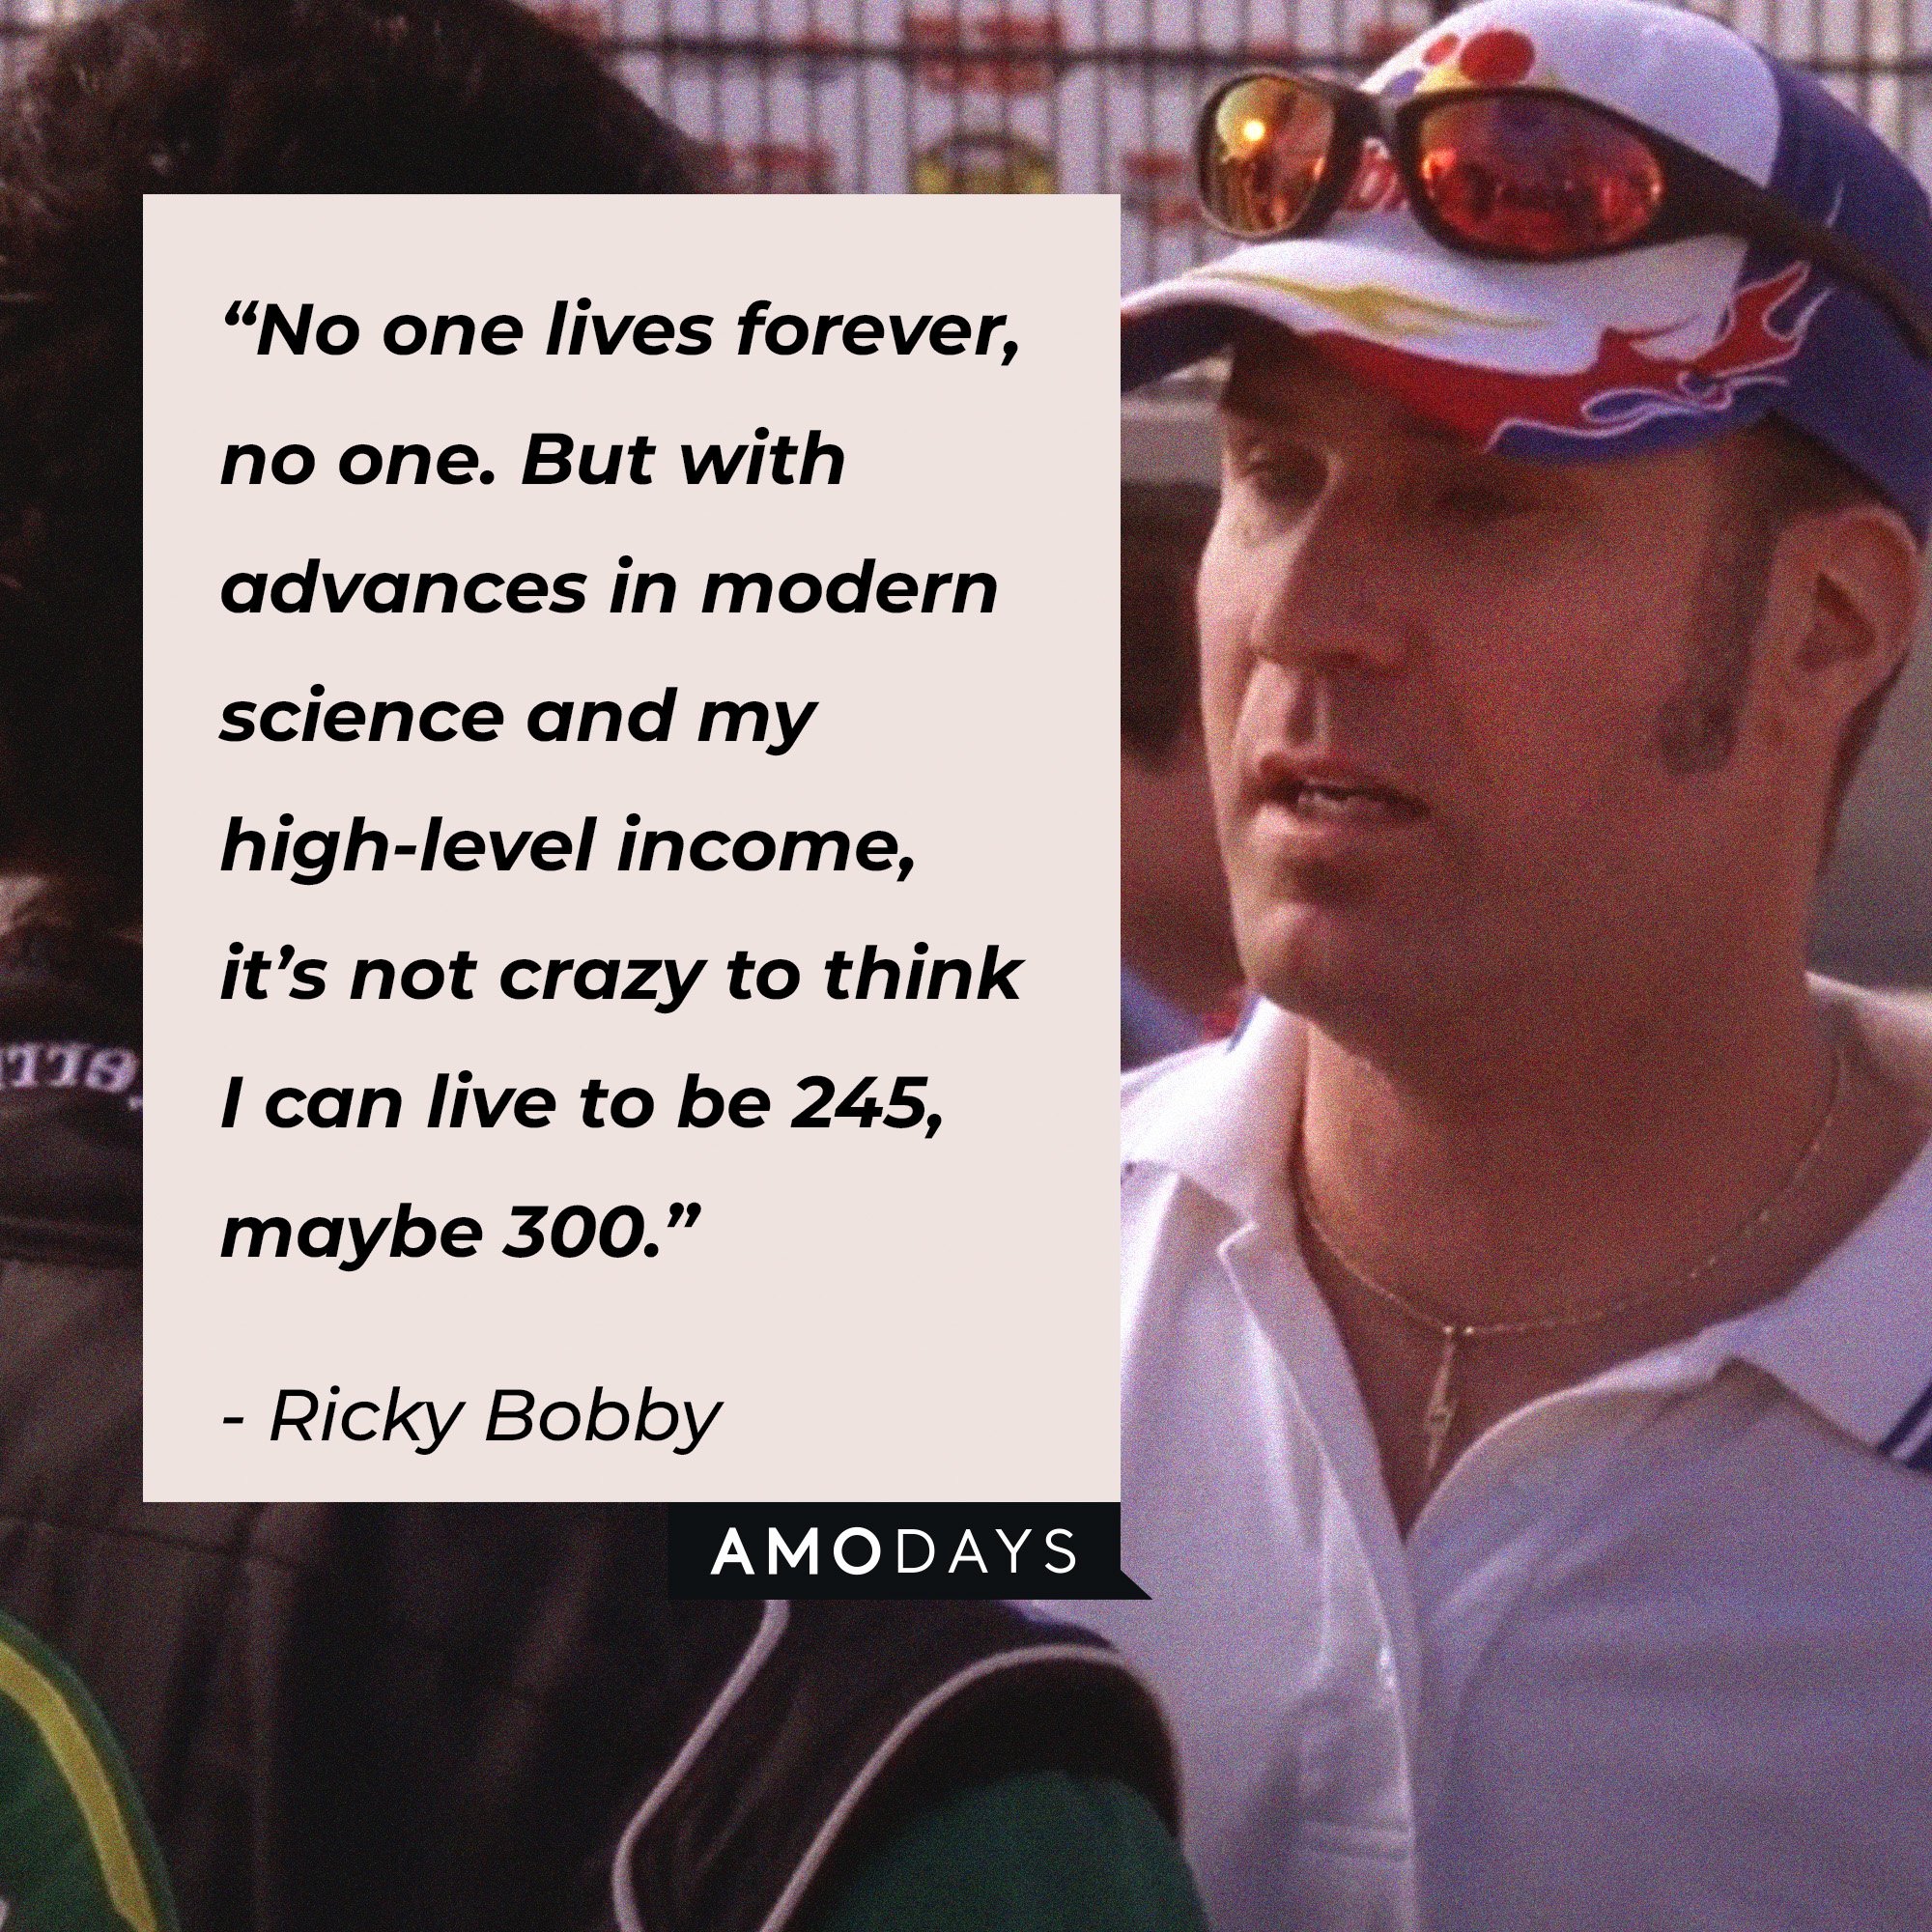 Ricky Bobby’s quote: “No one lives forever, no one. But with advances in modern science and my high-level income, it’s not crazy to think I can live to be 245, maybe 300.” | Image: AmoDays